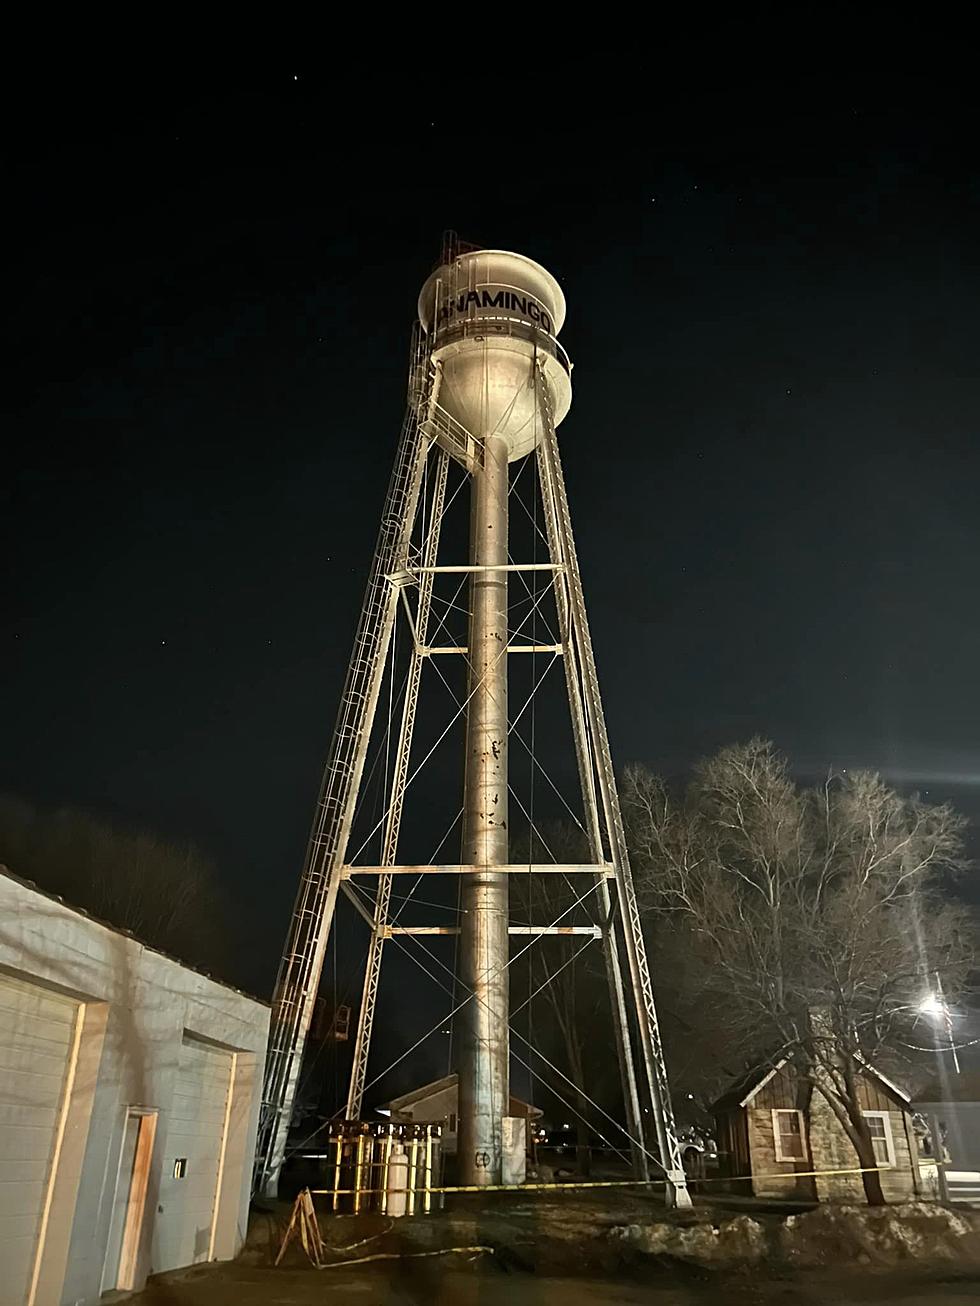 A Shout Out To All Those Minnesota Small Town Water Towers &#038; What They Mean